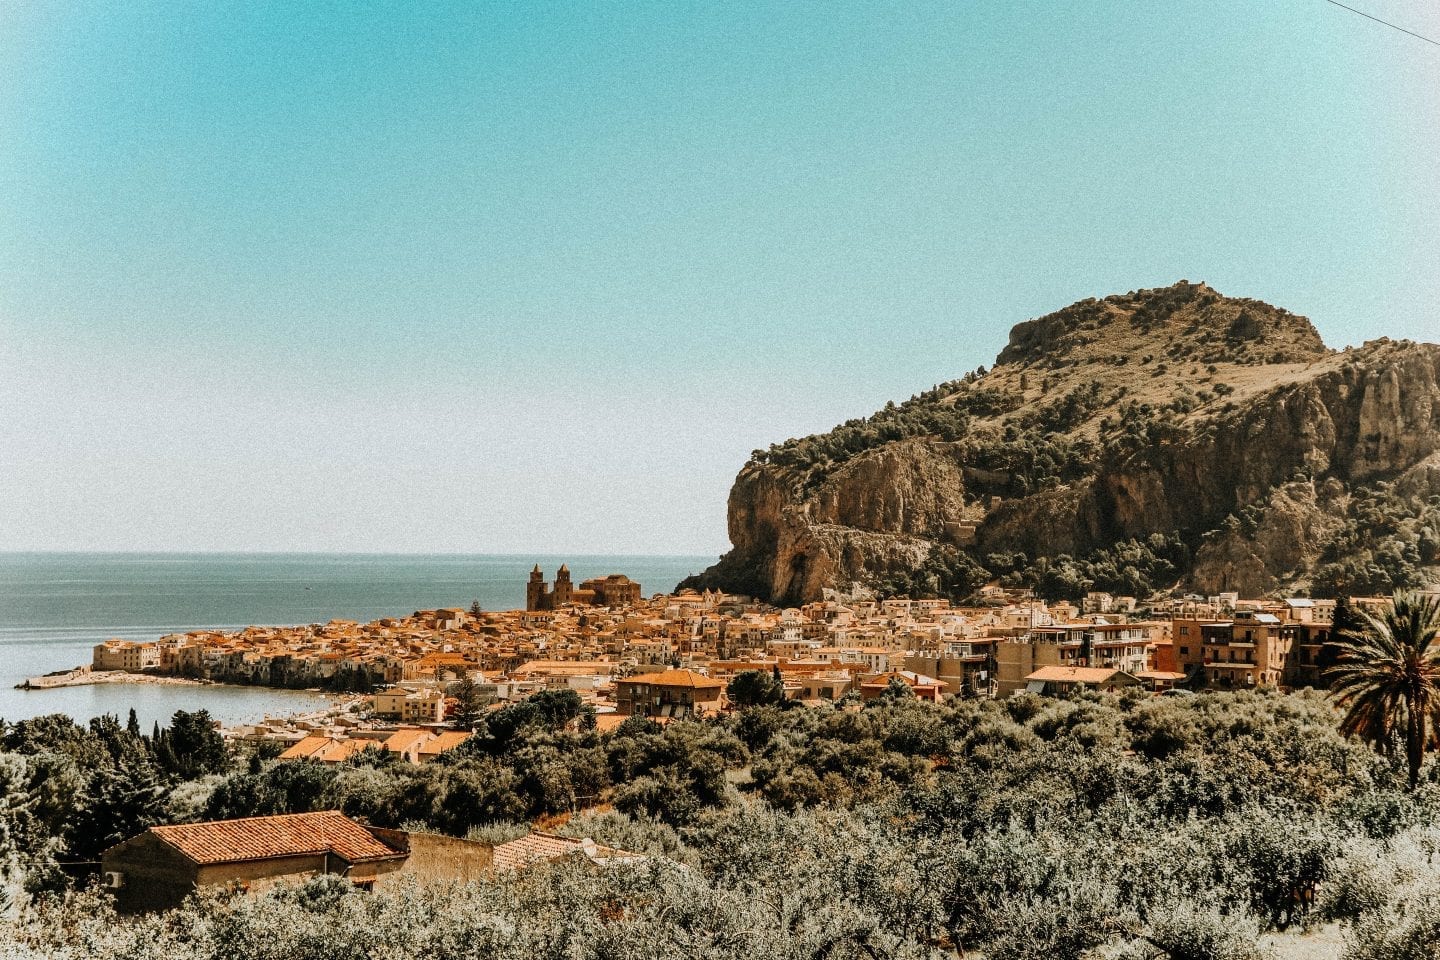 Why You Need To Travel To Sicily (& Photos to Inspire)